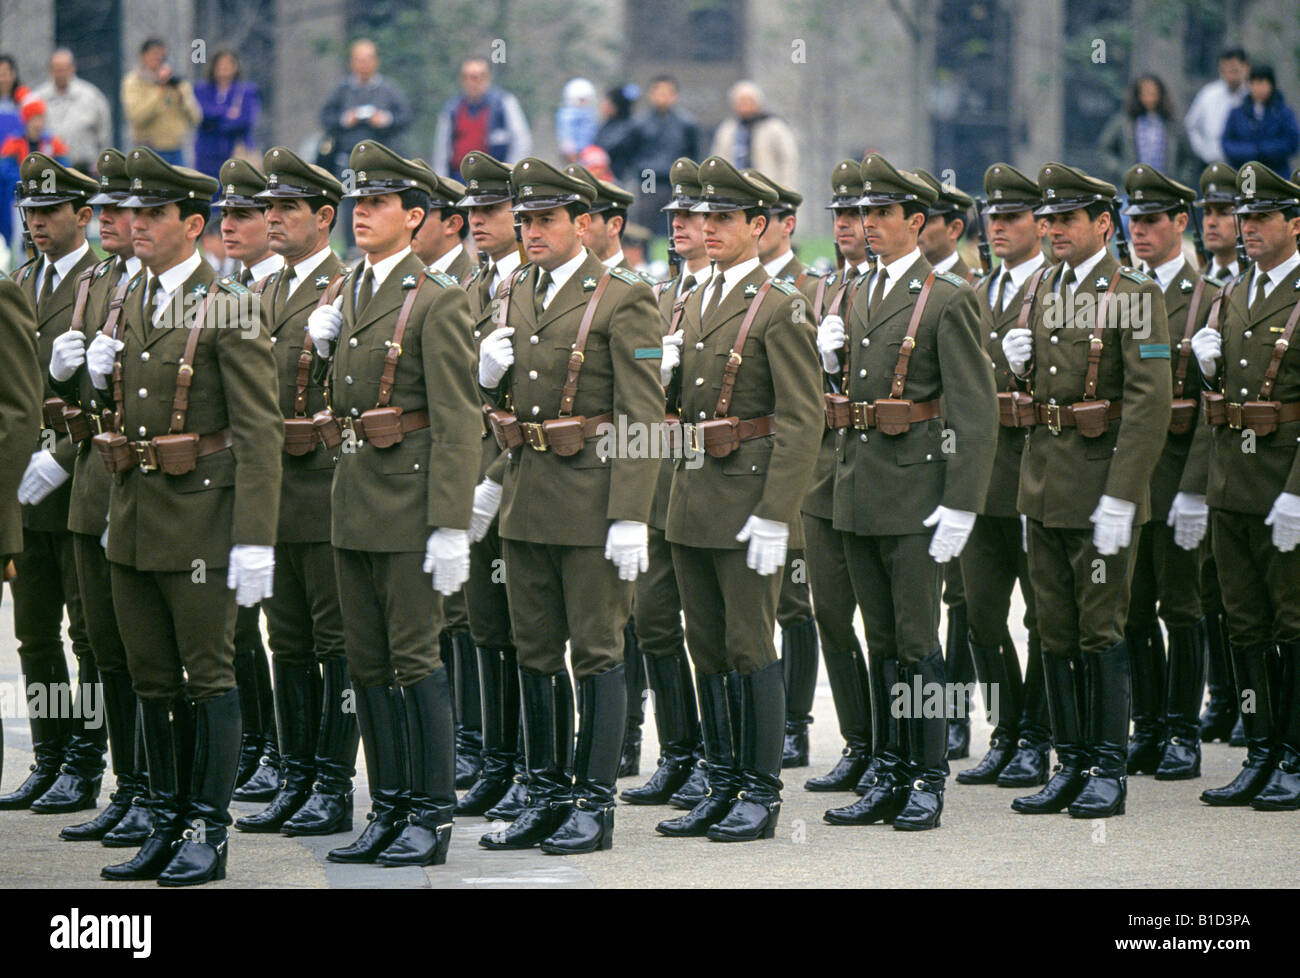 The Carabiniers of Chile, the uniformed Chilean national police force, in Santiago, Chile, on parade. Stock Photo